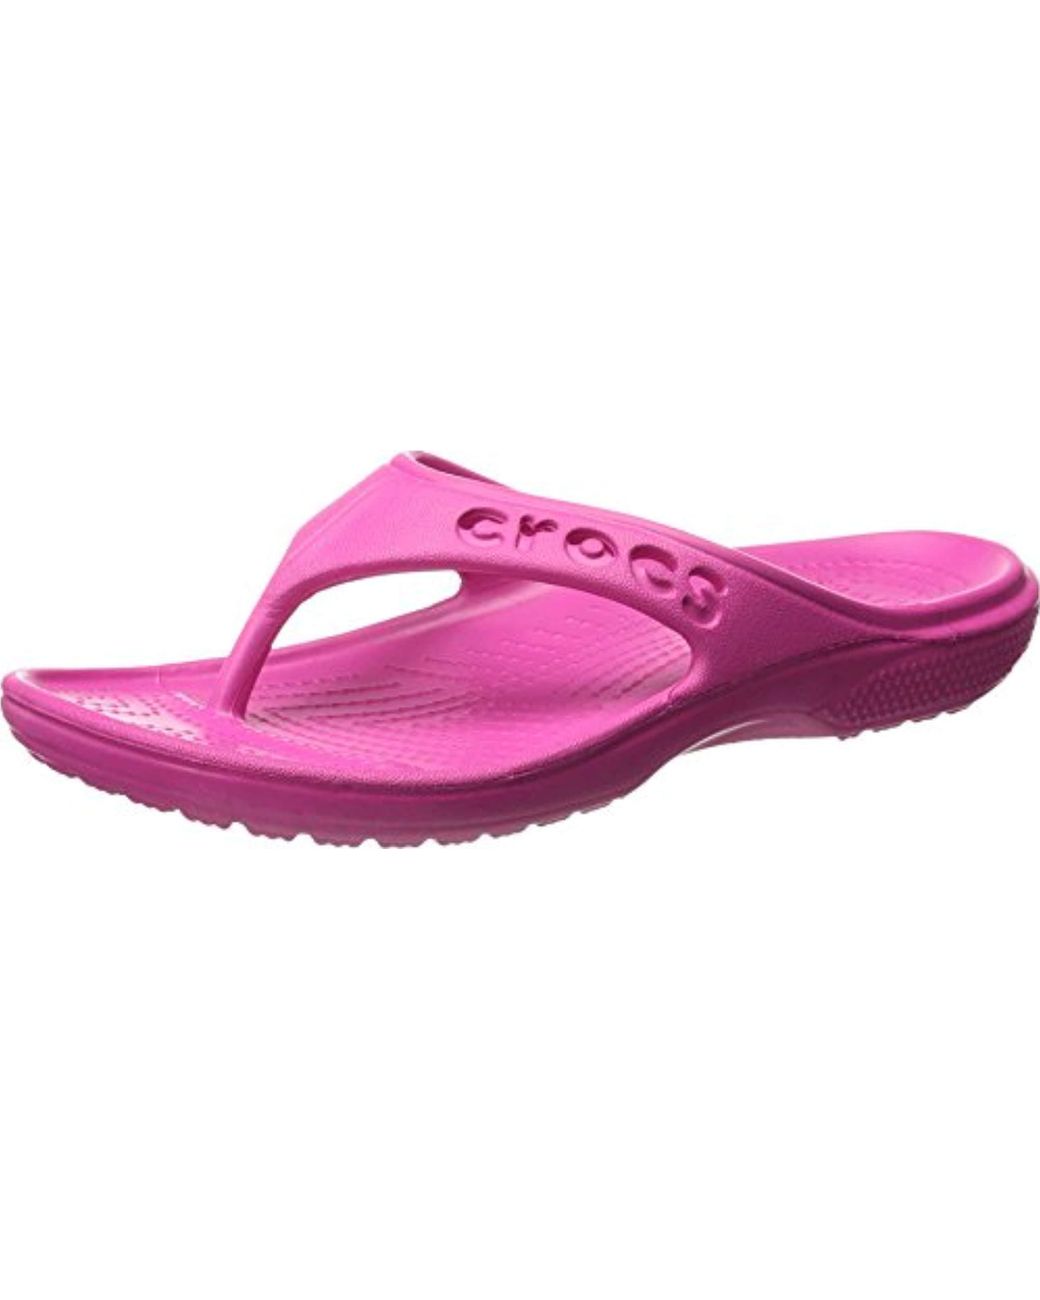 Crocs™ And Baya Flip Flop in Candy Pink (Pink) | Lyst